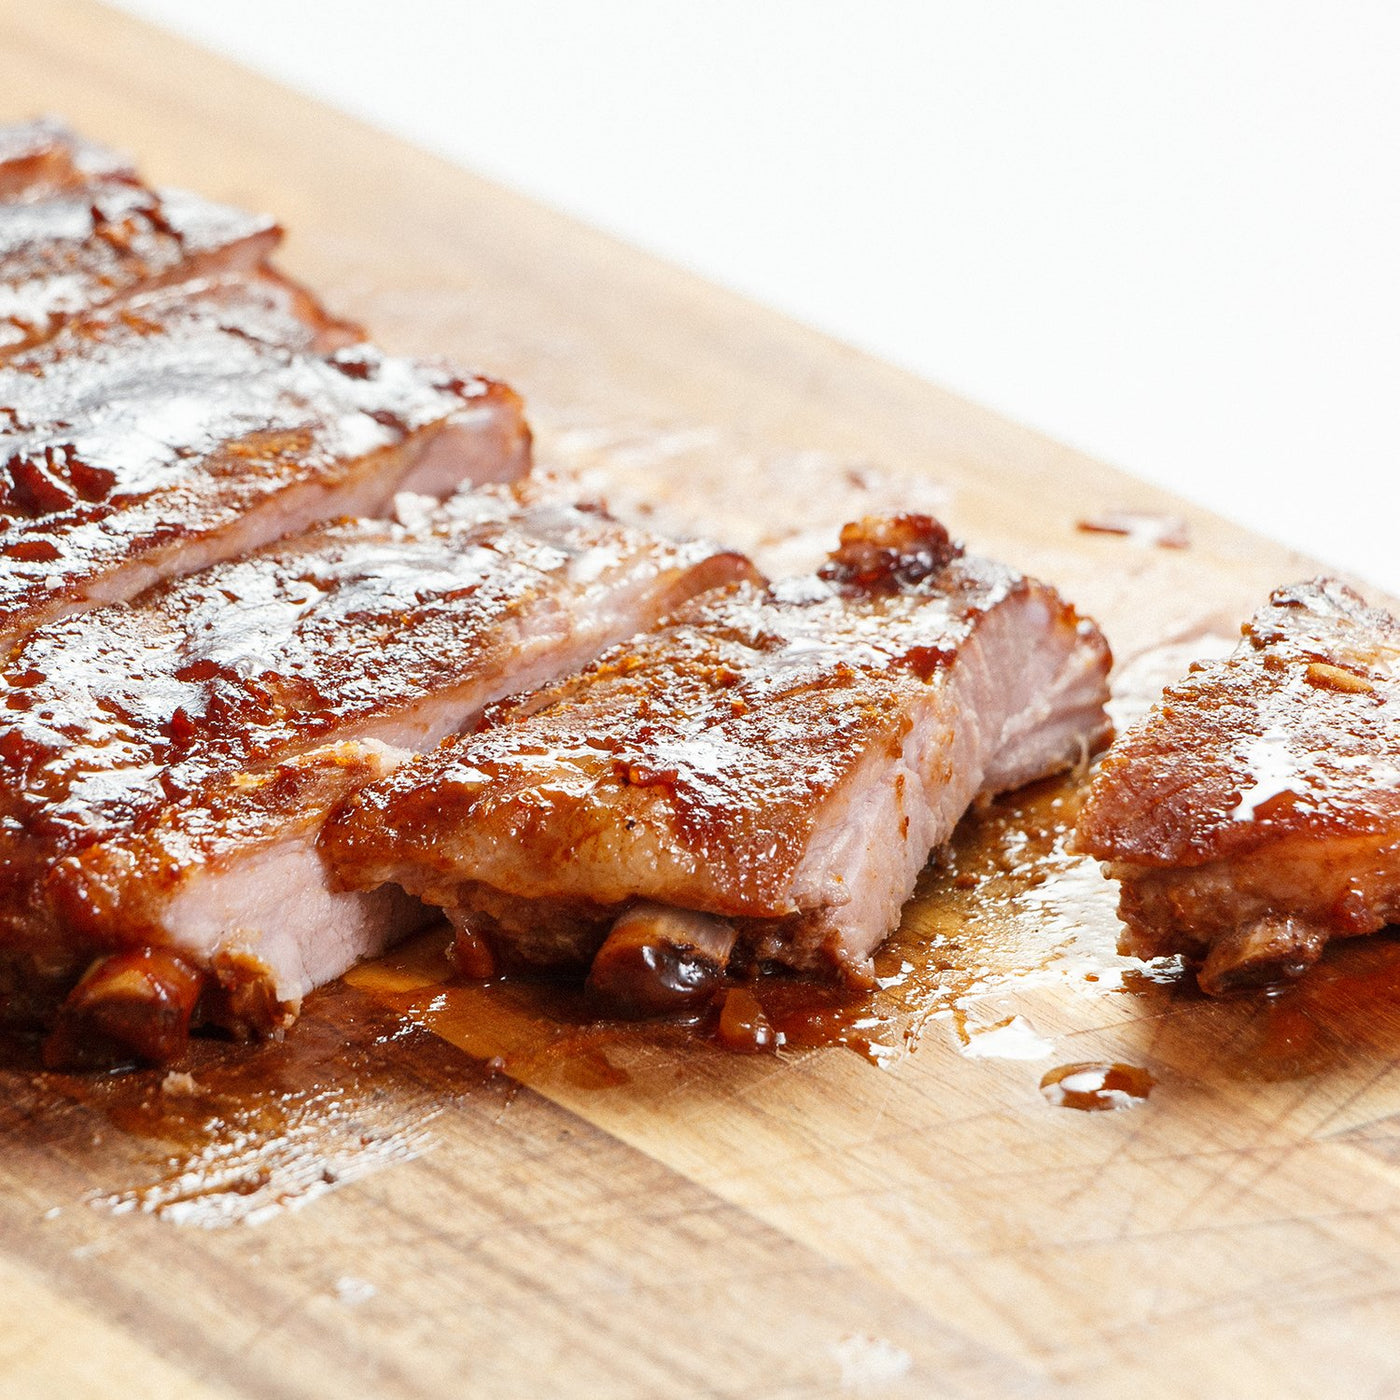 Barbecued Oven Ribs